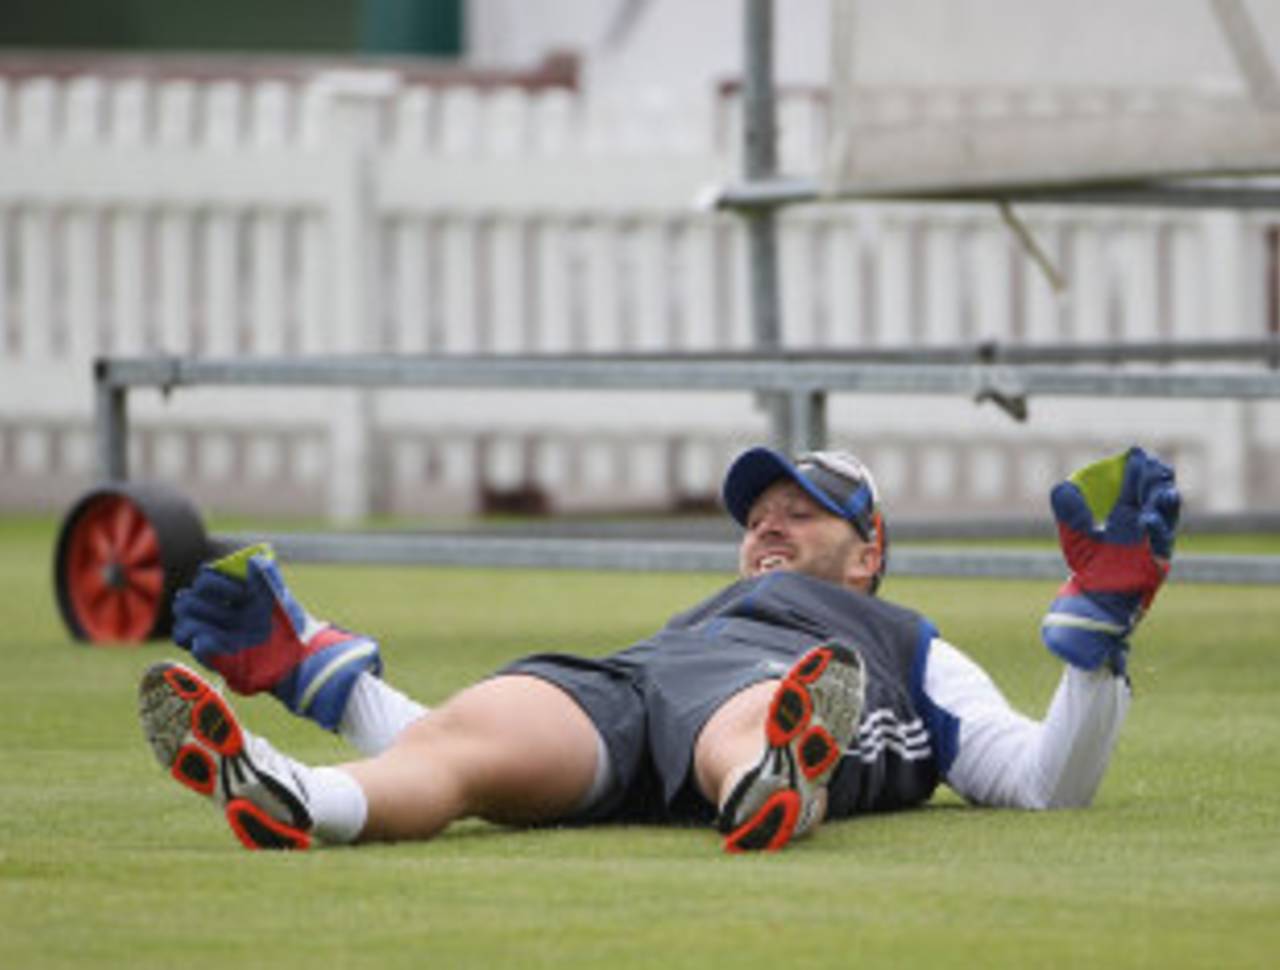 Matt Prior ends up flat-out during keeping drills, Lord's, May 15, 2012